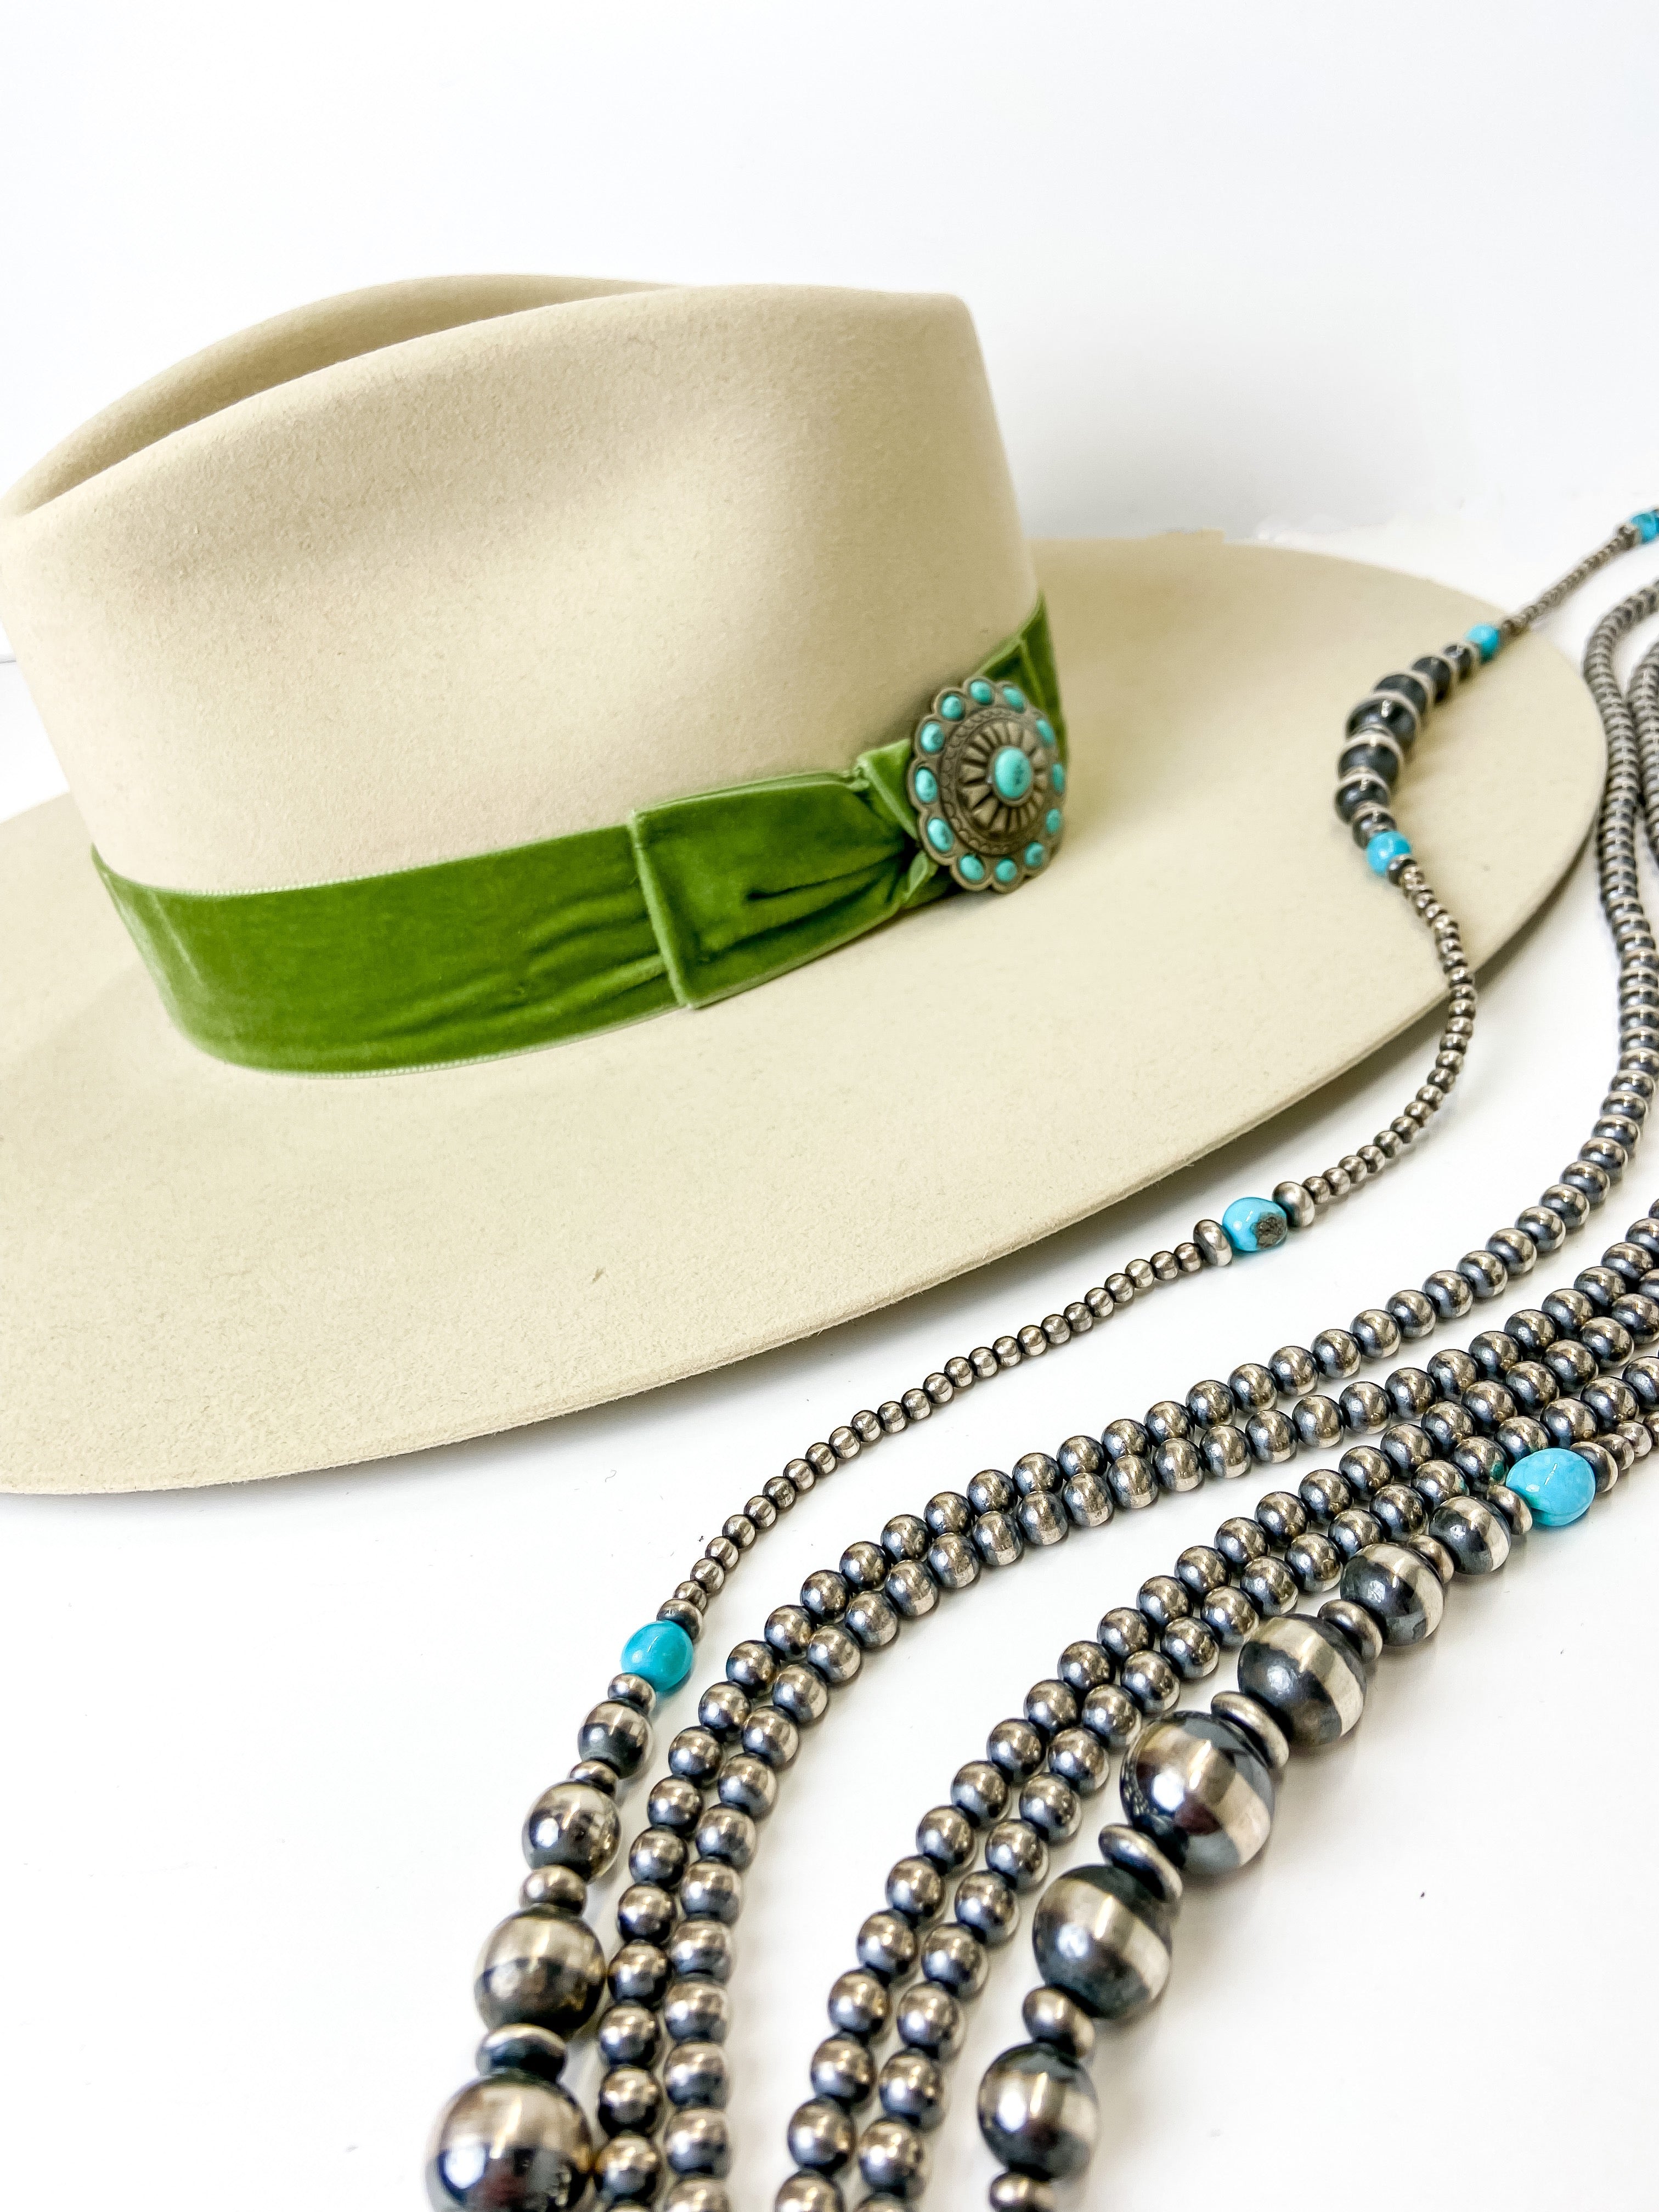 Charlie 1 Horse | Shiloh Wool Felt Hat with Green Velvet Band and Silver Concho in Ivory - Giddy Up Glamour Boutique